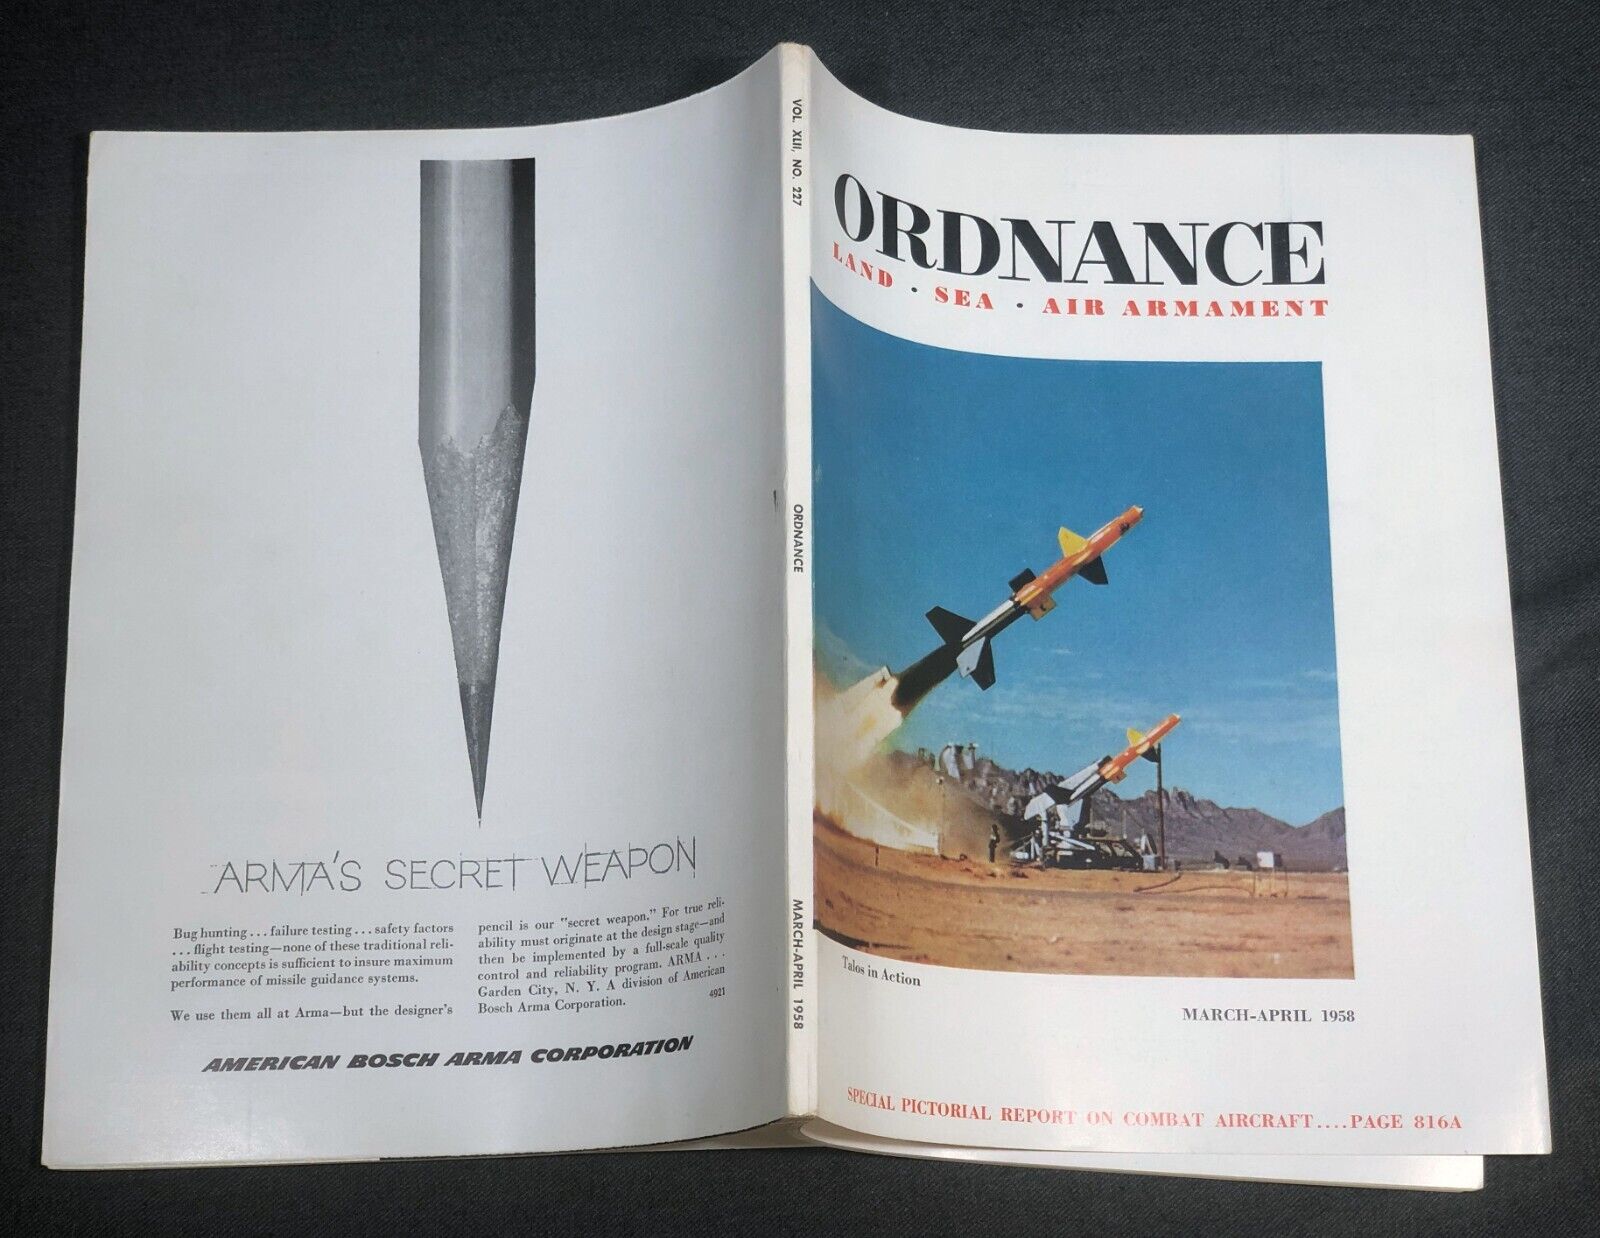 ORDNANCE Magazine 1958 Ordnance in Outer Space Torpedoes Tactical Air Power